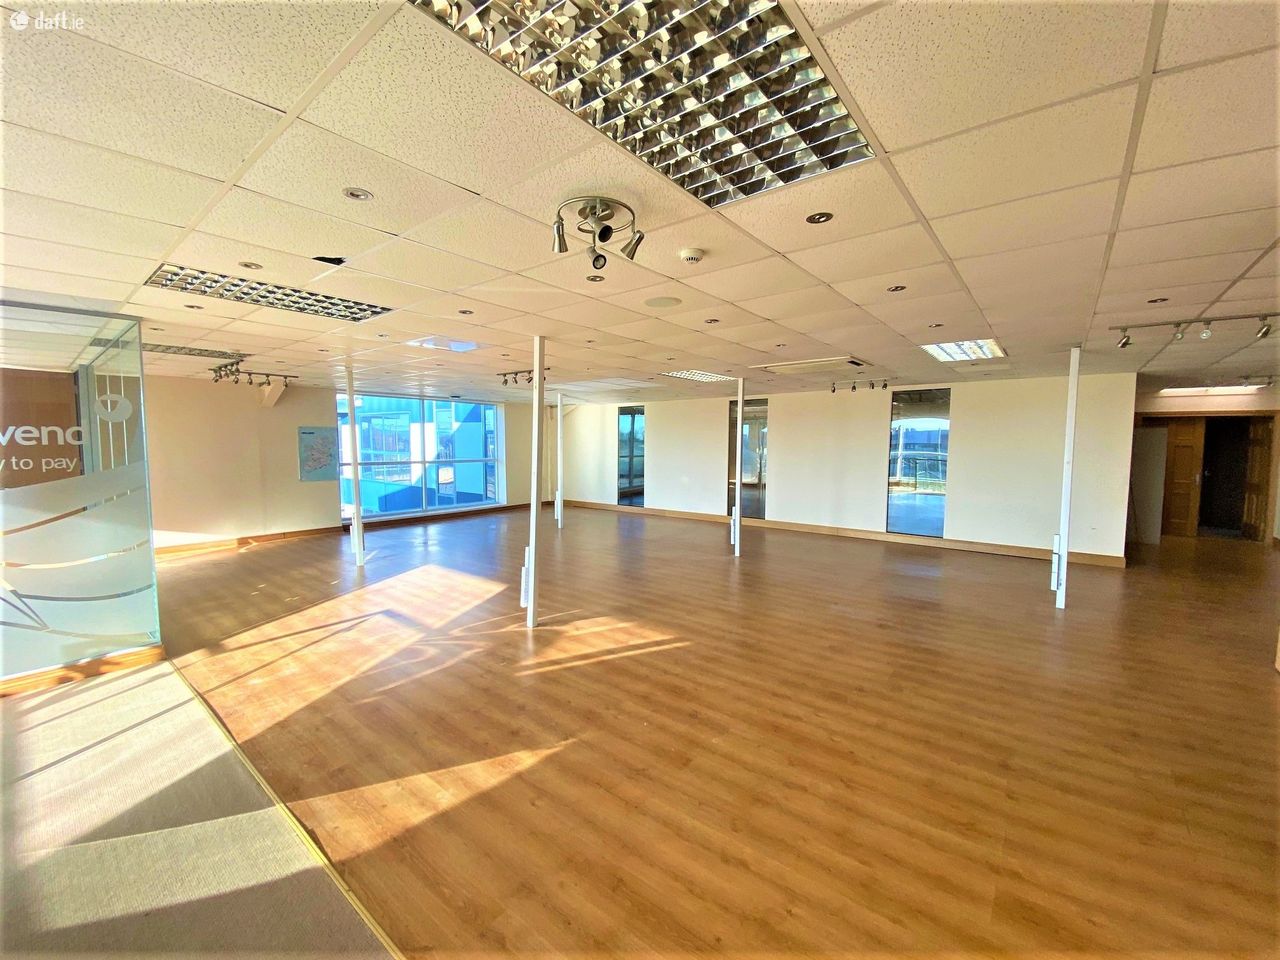 Unit 10B Cleaboy Business Park, Waterford City, Co. Waterford